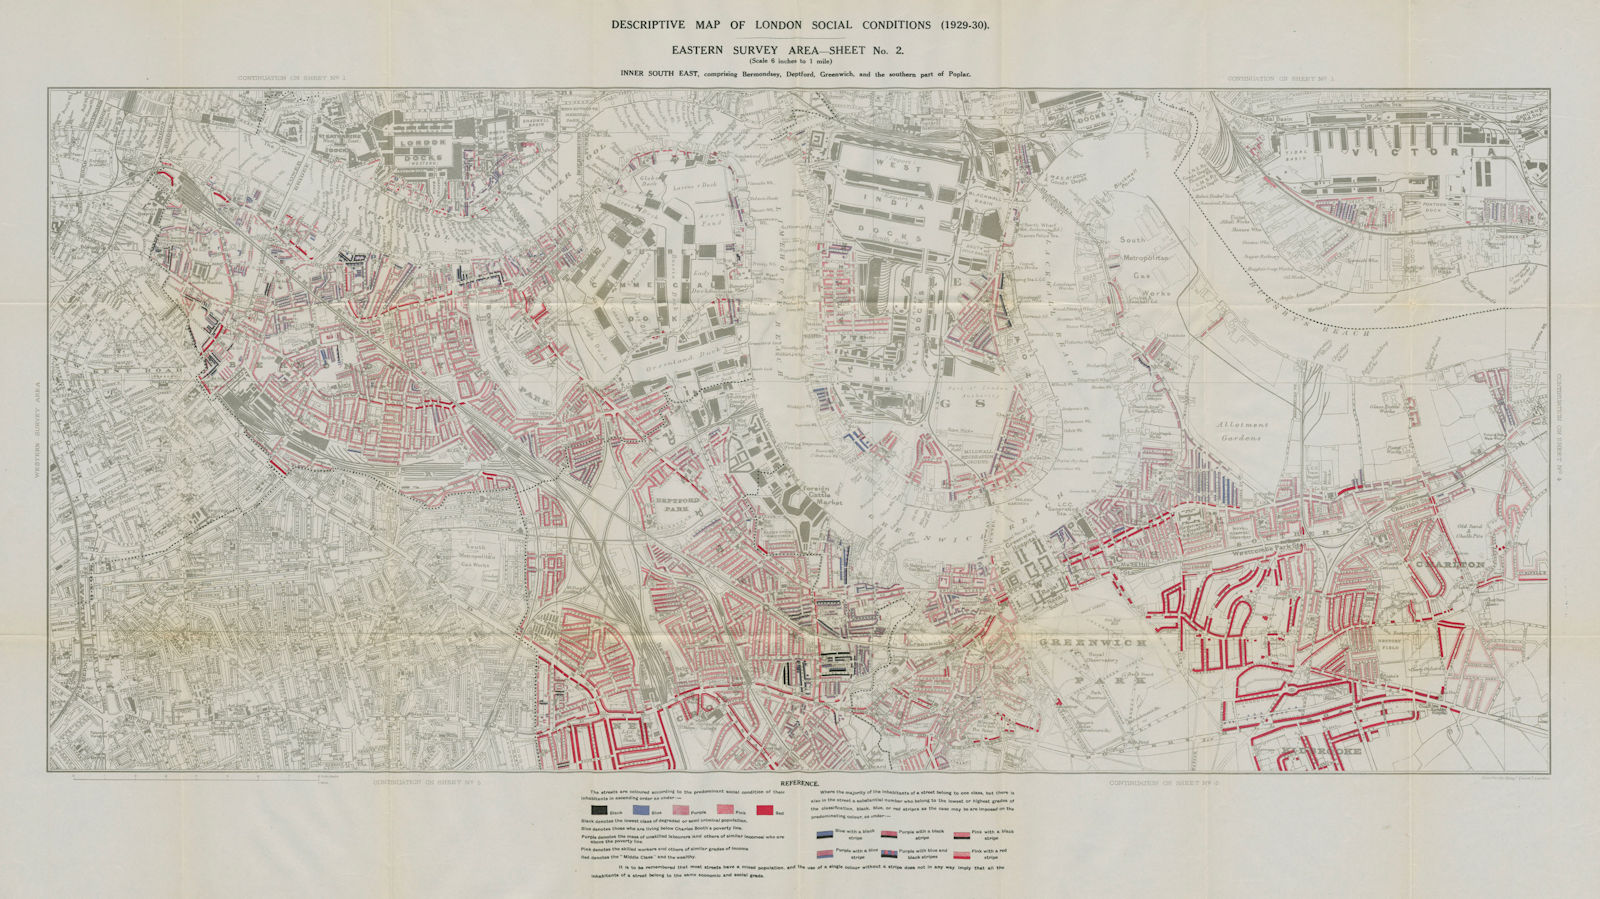 BOOTH/LSE POVERTY MAP Bermondsey Deptford Greenwich Isle of Dogs Docklands 1931